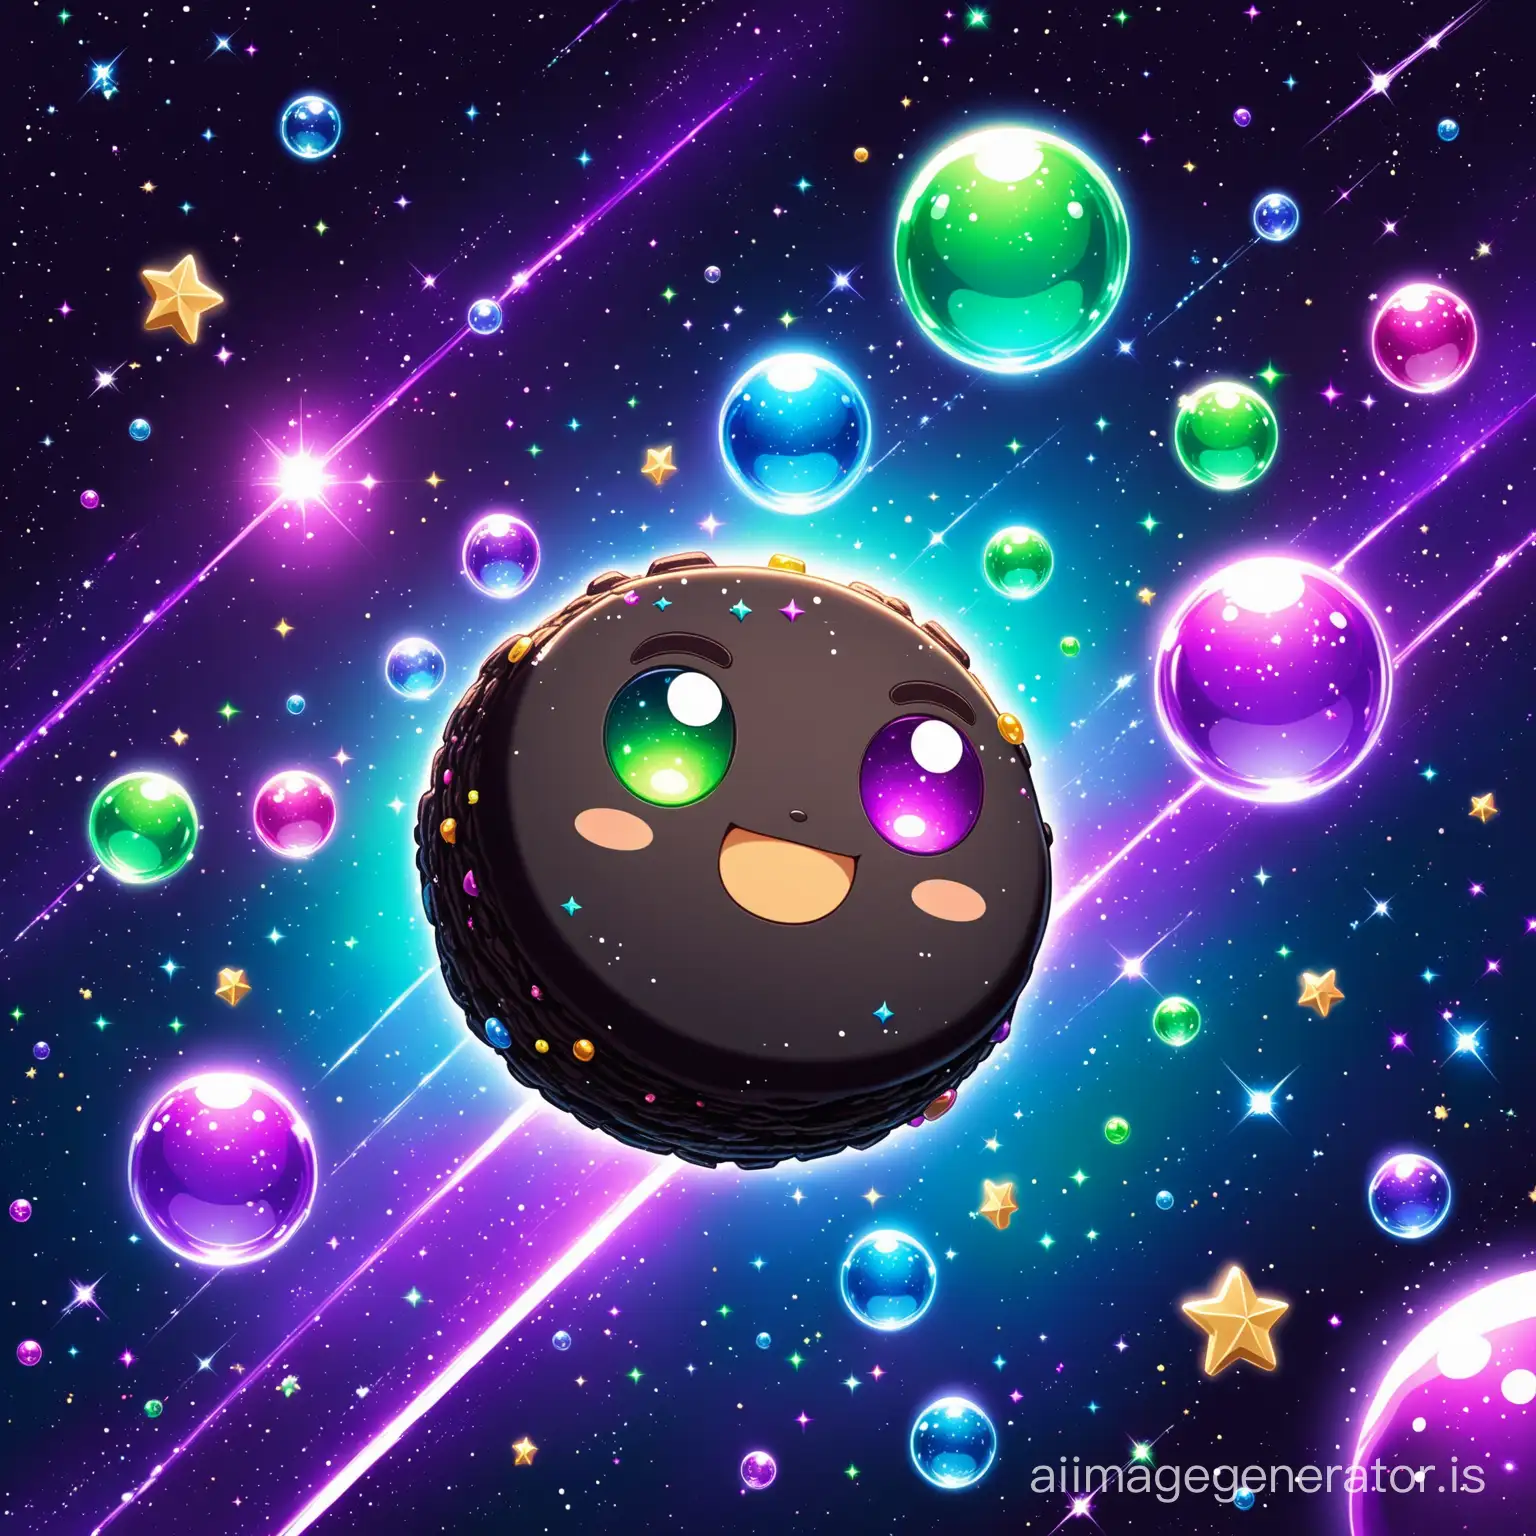 Joyful-Black-Cookie-with-Green-Eyes-Flying-in-Space-amidst-Bubbles-and-Purple-Blocks